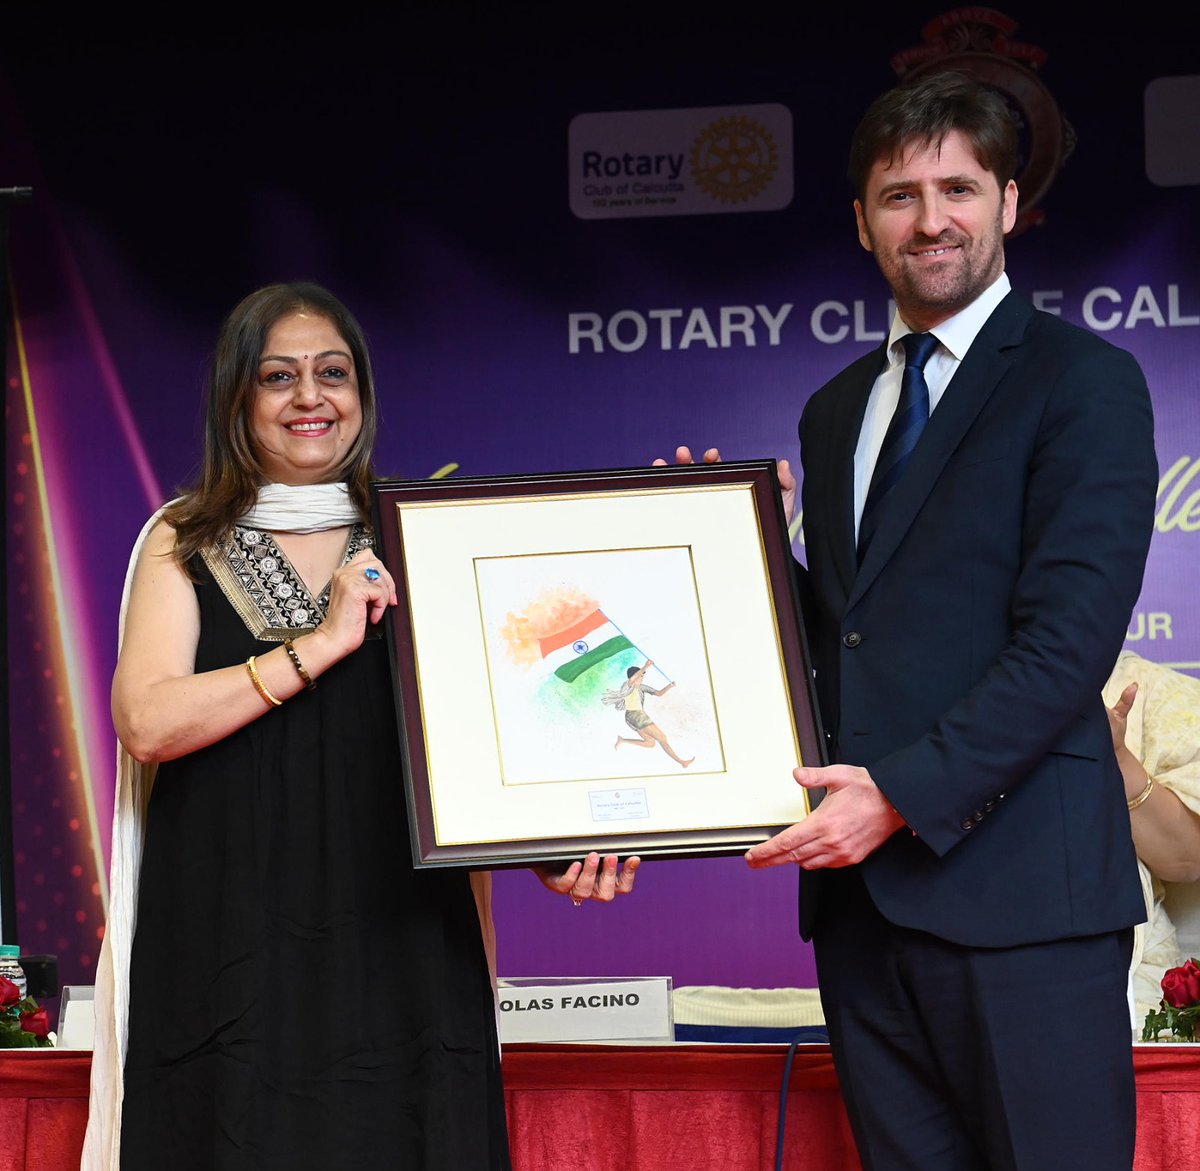 On Mar 28, the Programme Chairperson of Rotary Club of Calcutta, Ms. Renuka Shah welcomed Mr. Facino as the guest of honour at The Rotary Vocational Service Excellence Award meet that celebrates the efforts made in areas of Vocational Service to train and empower job seekers.